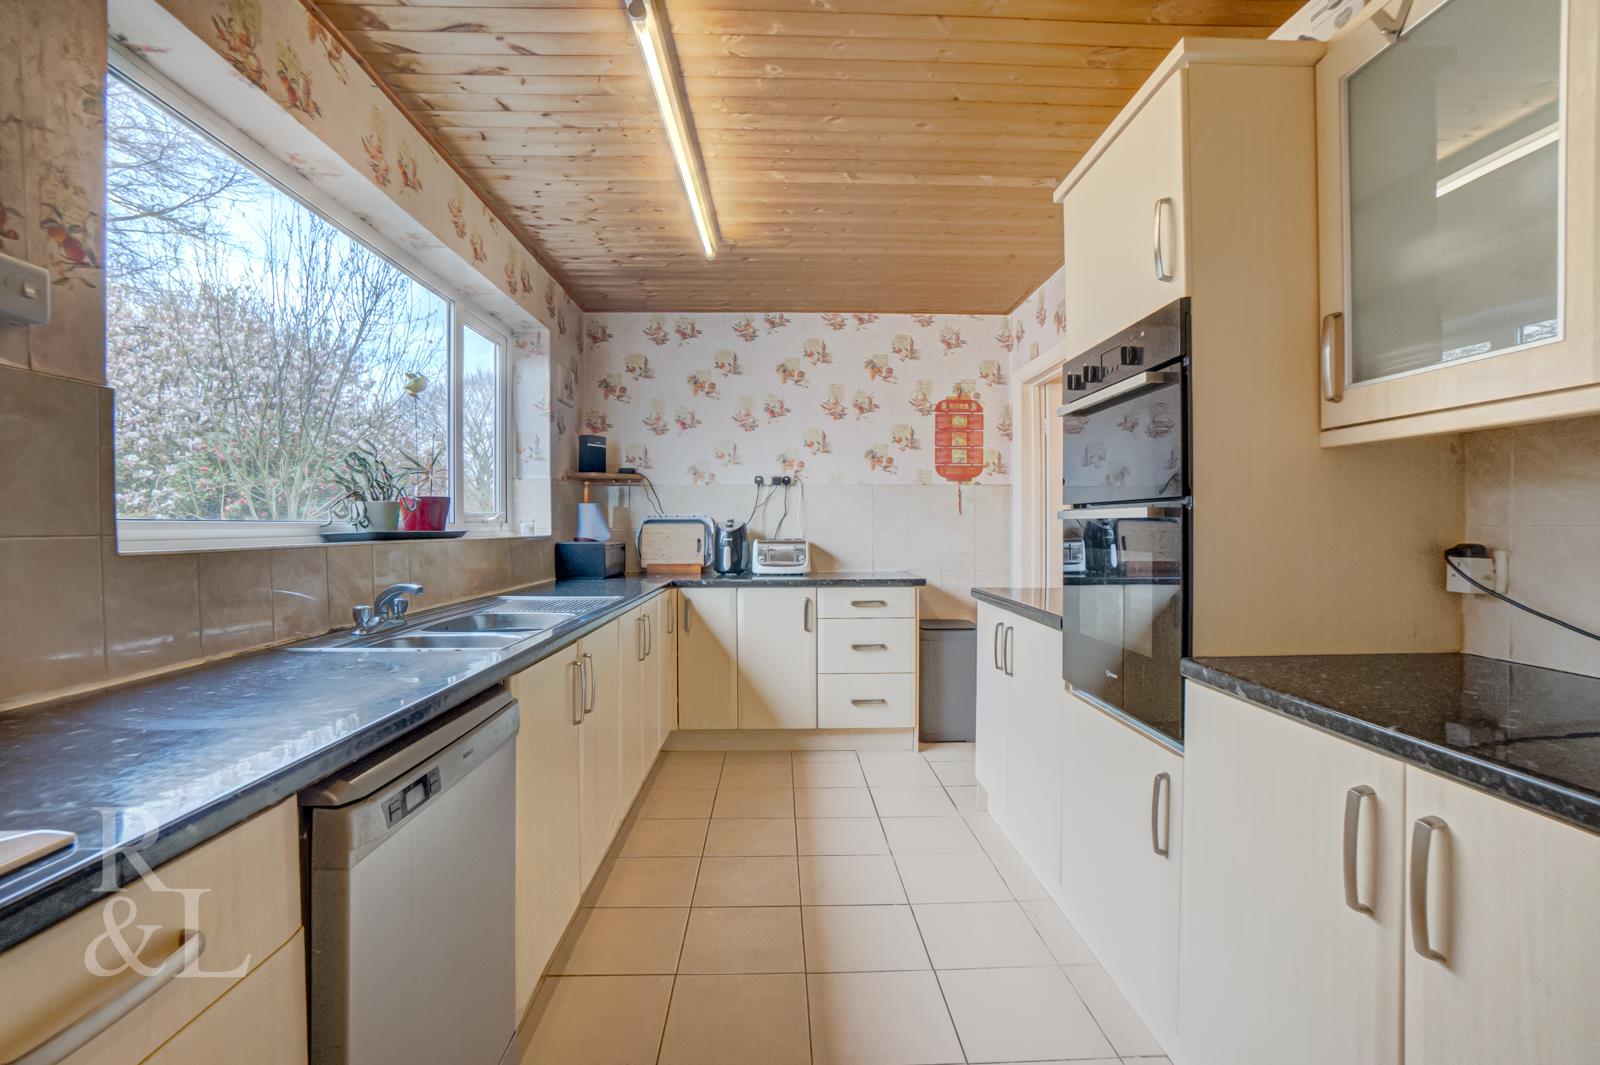 Property image for Trent View Gardens, Radcliffe-On-Trent, Nottingham